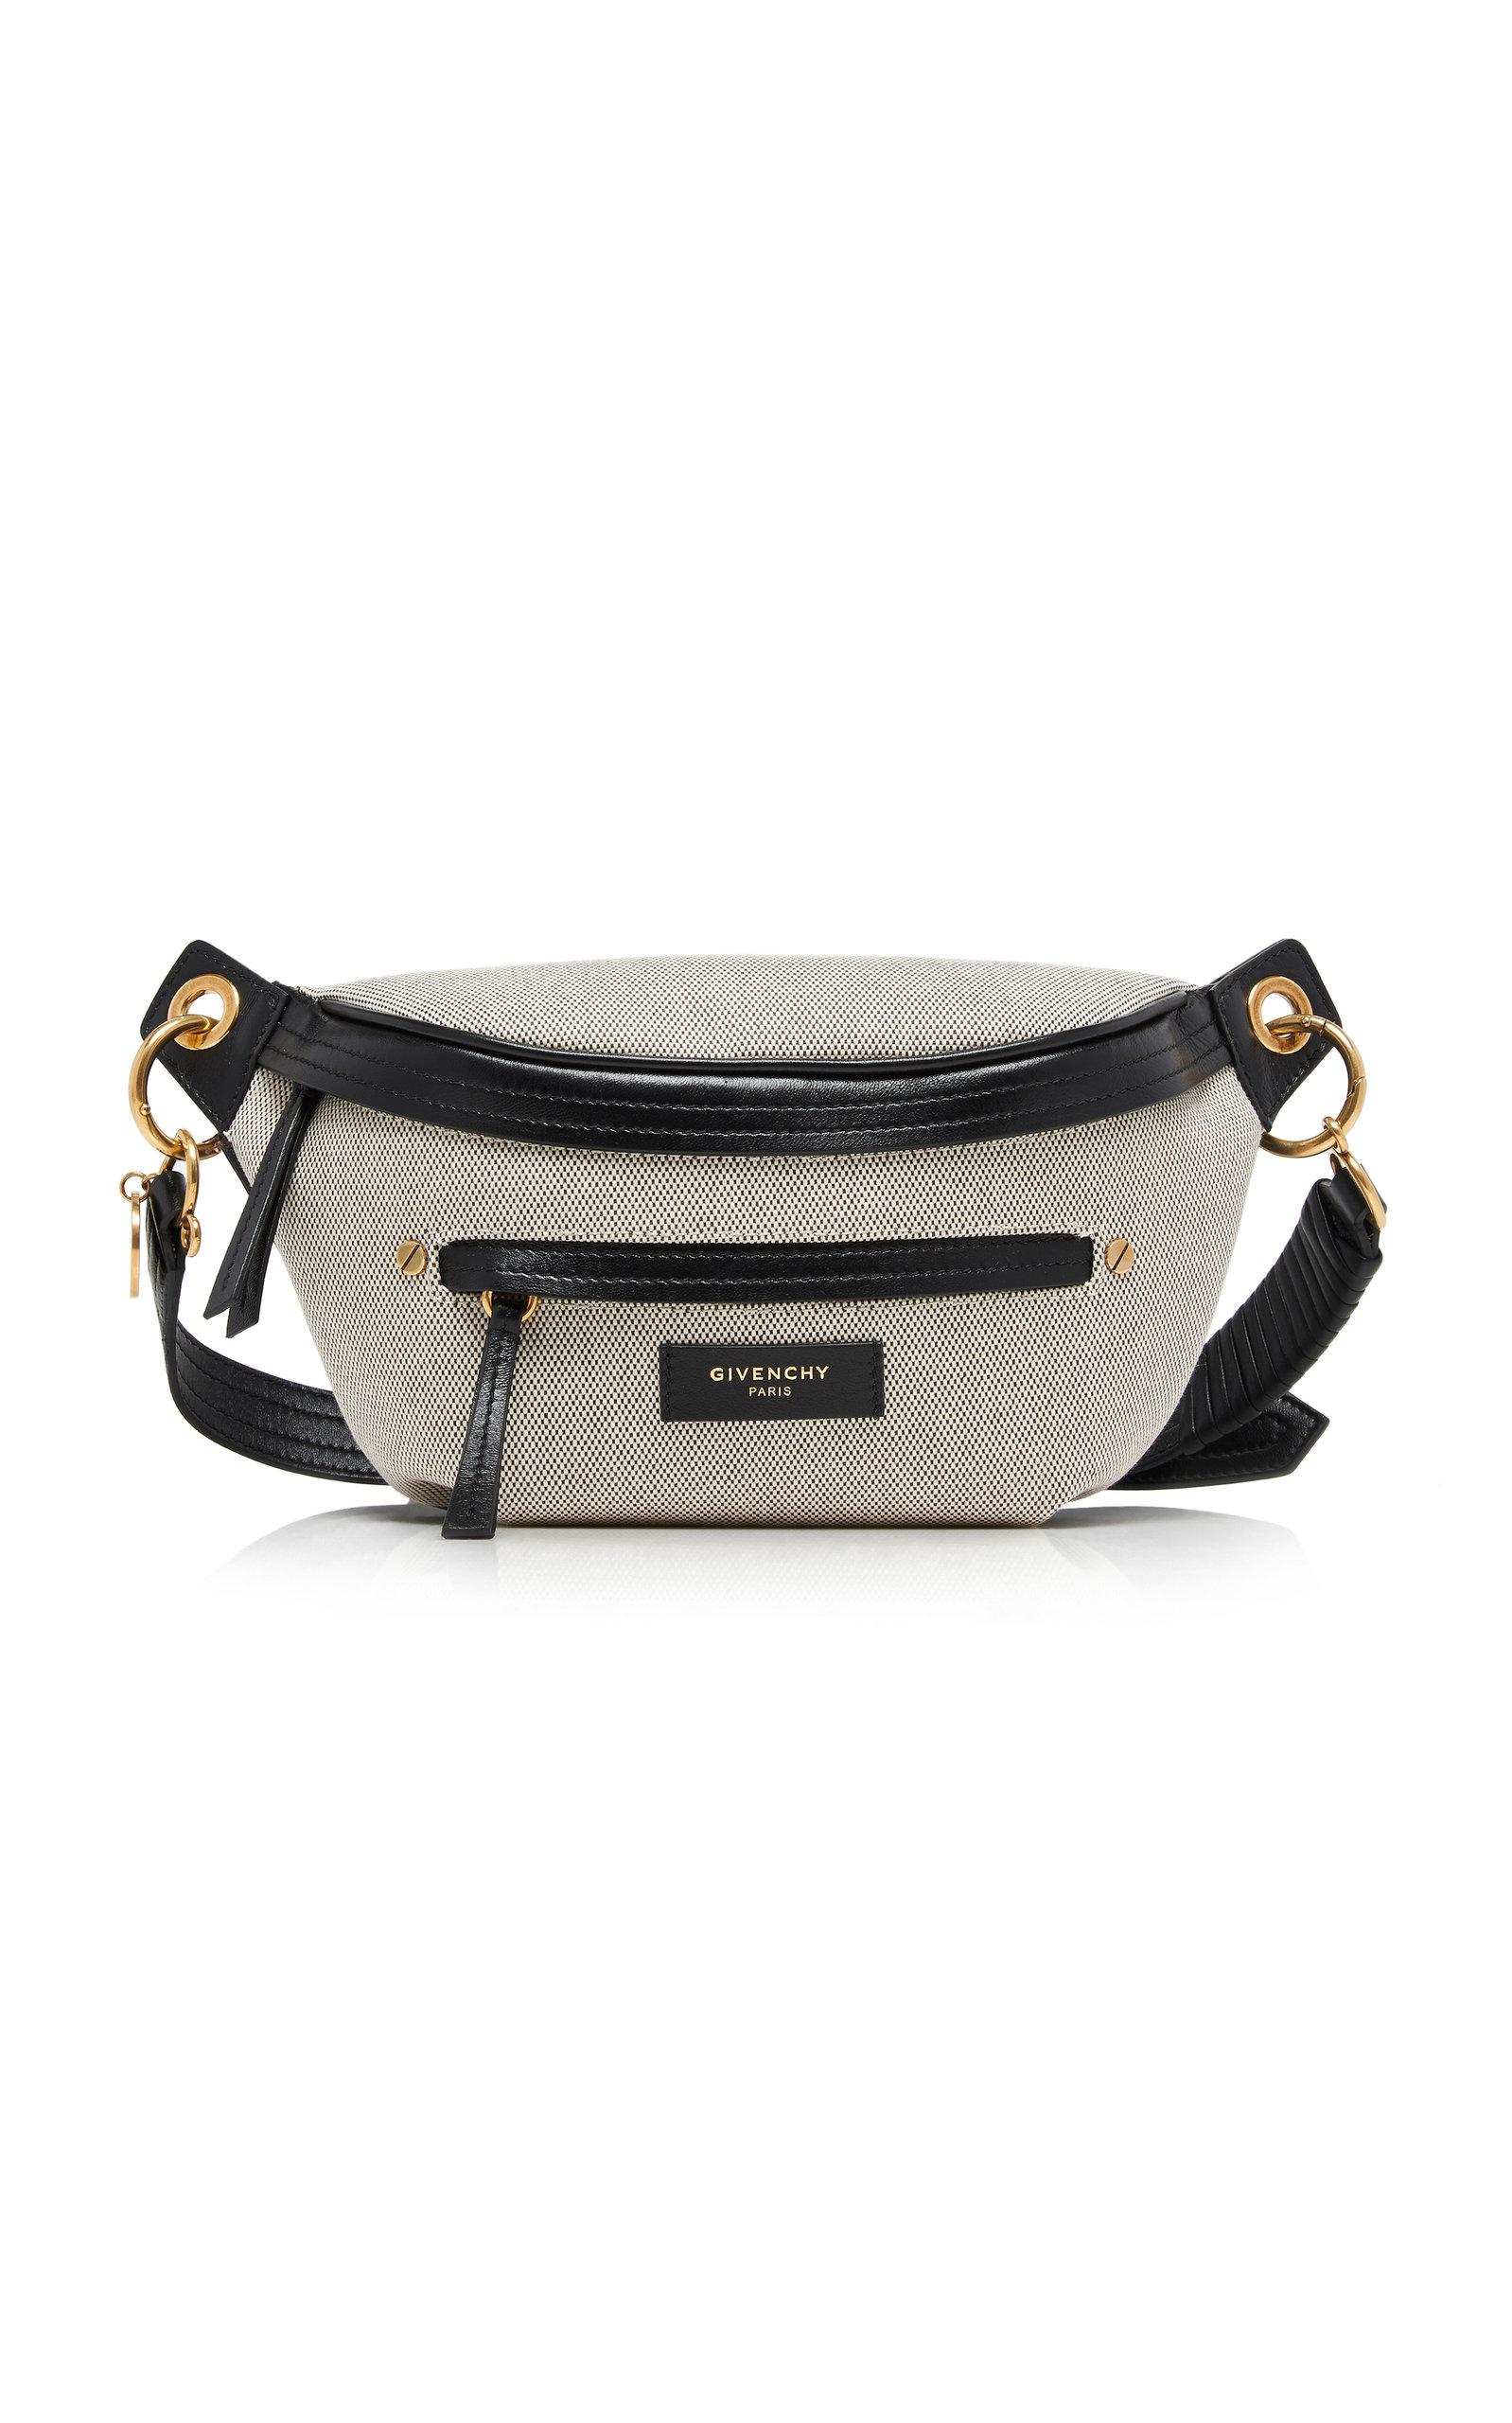 Givenchy Whip Leather-trimmed Canvas Belt Bag in Black - Save 53% - Lyst